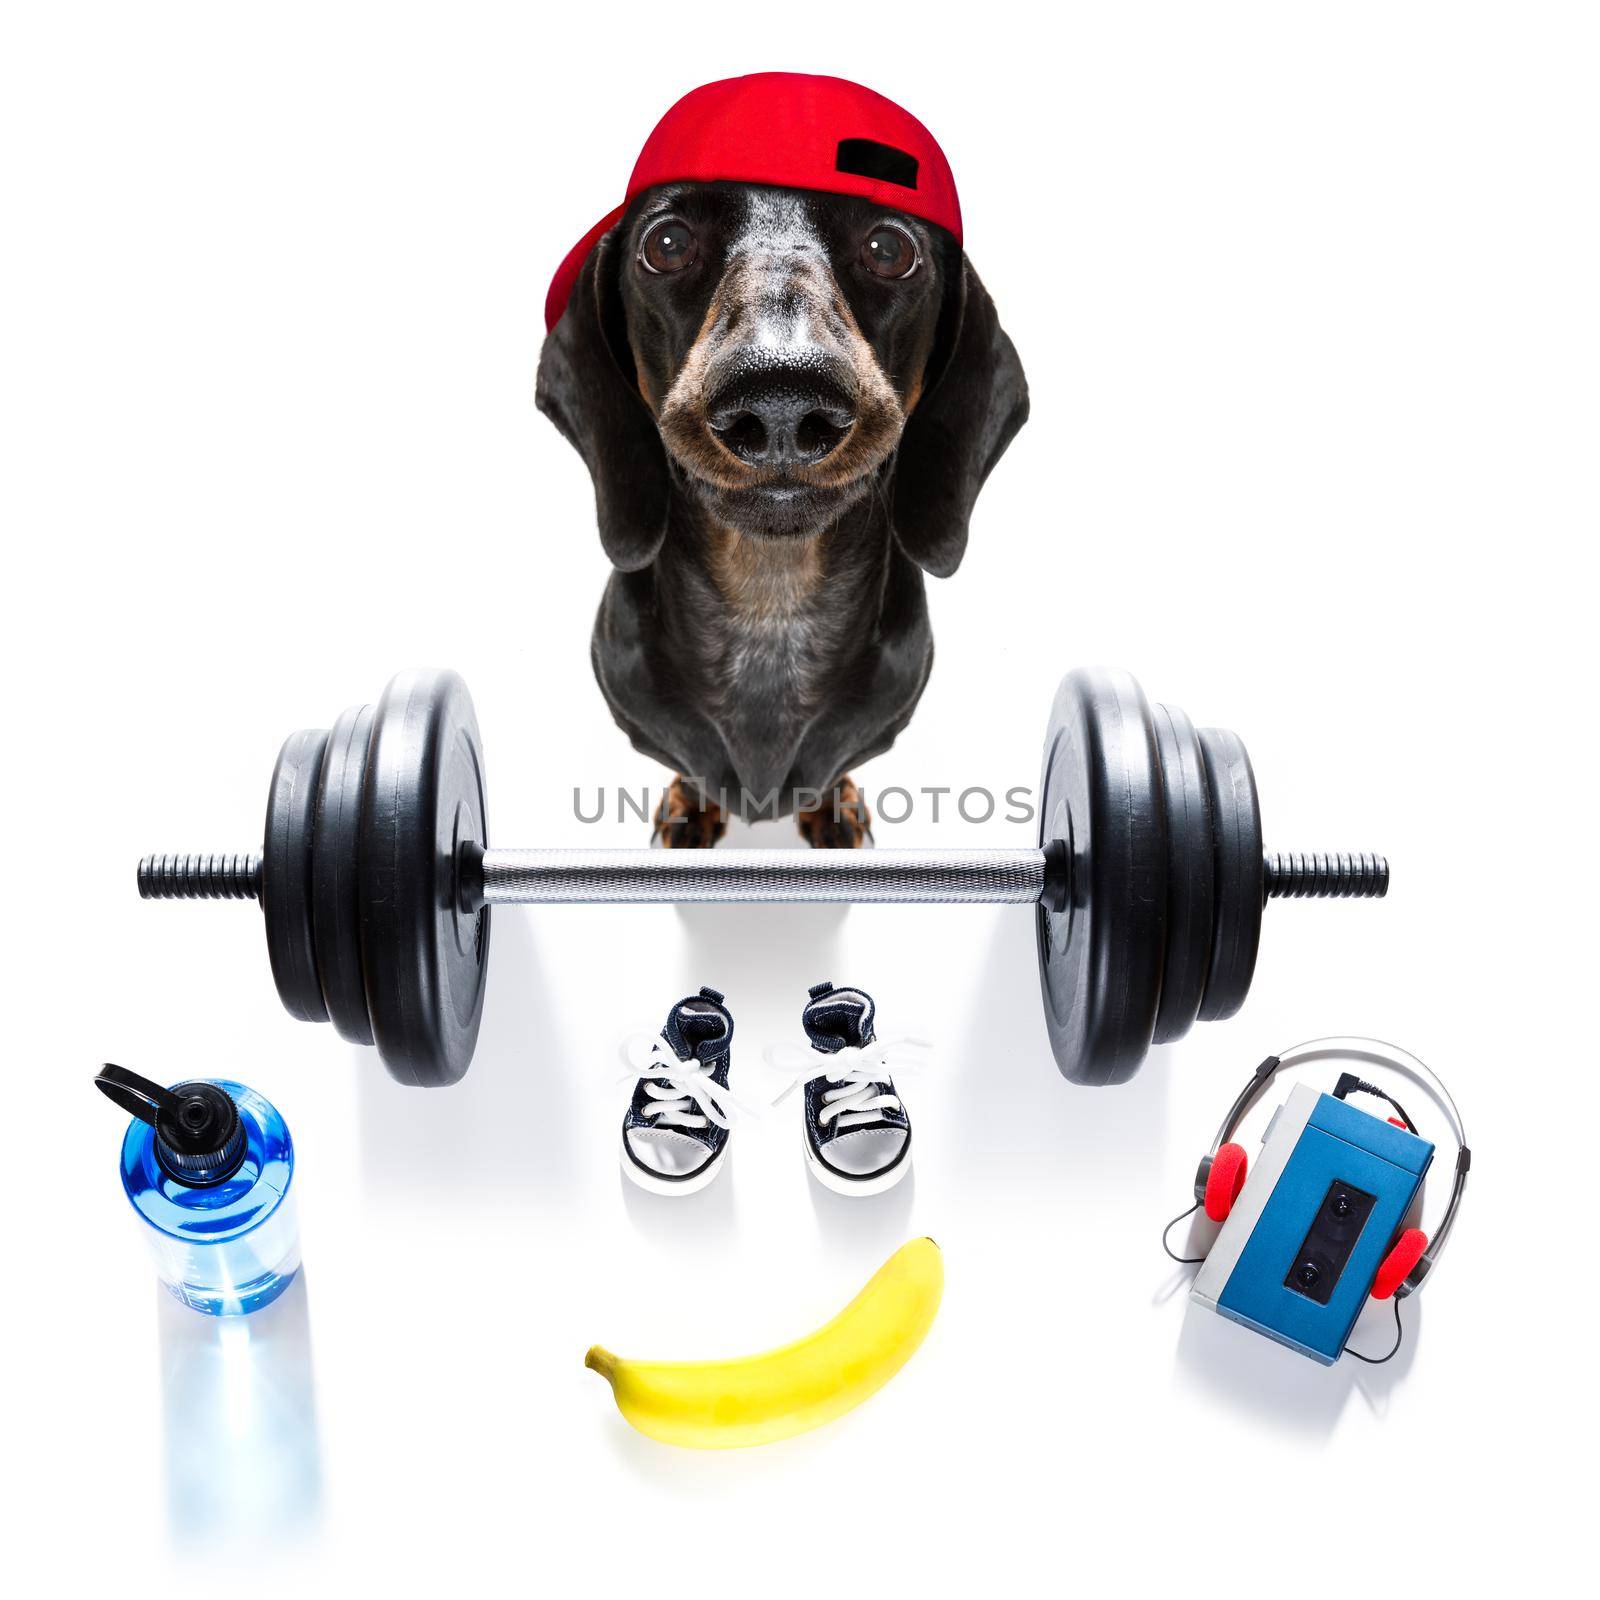 fitness sausage dachshund dog lifting a heavy big dumbbell, as personal trainer , isolated on white background and a banana fruit